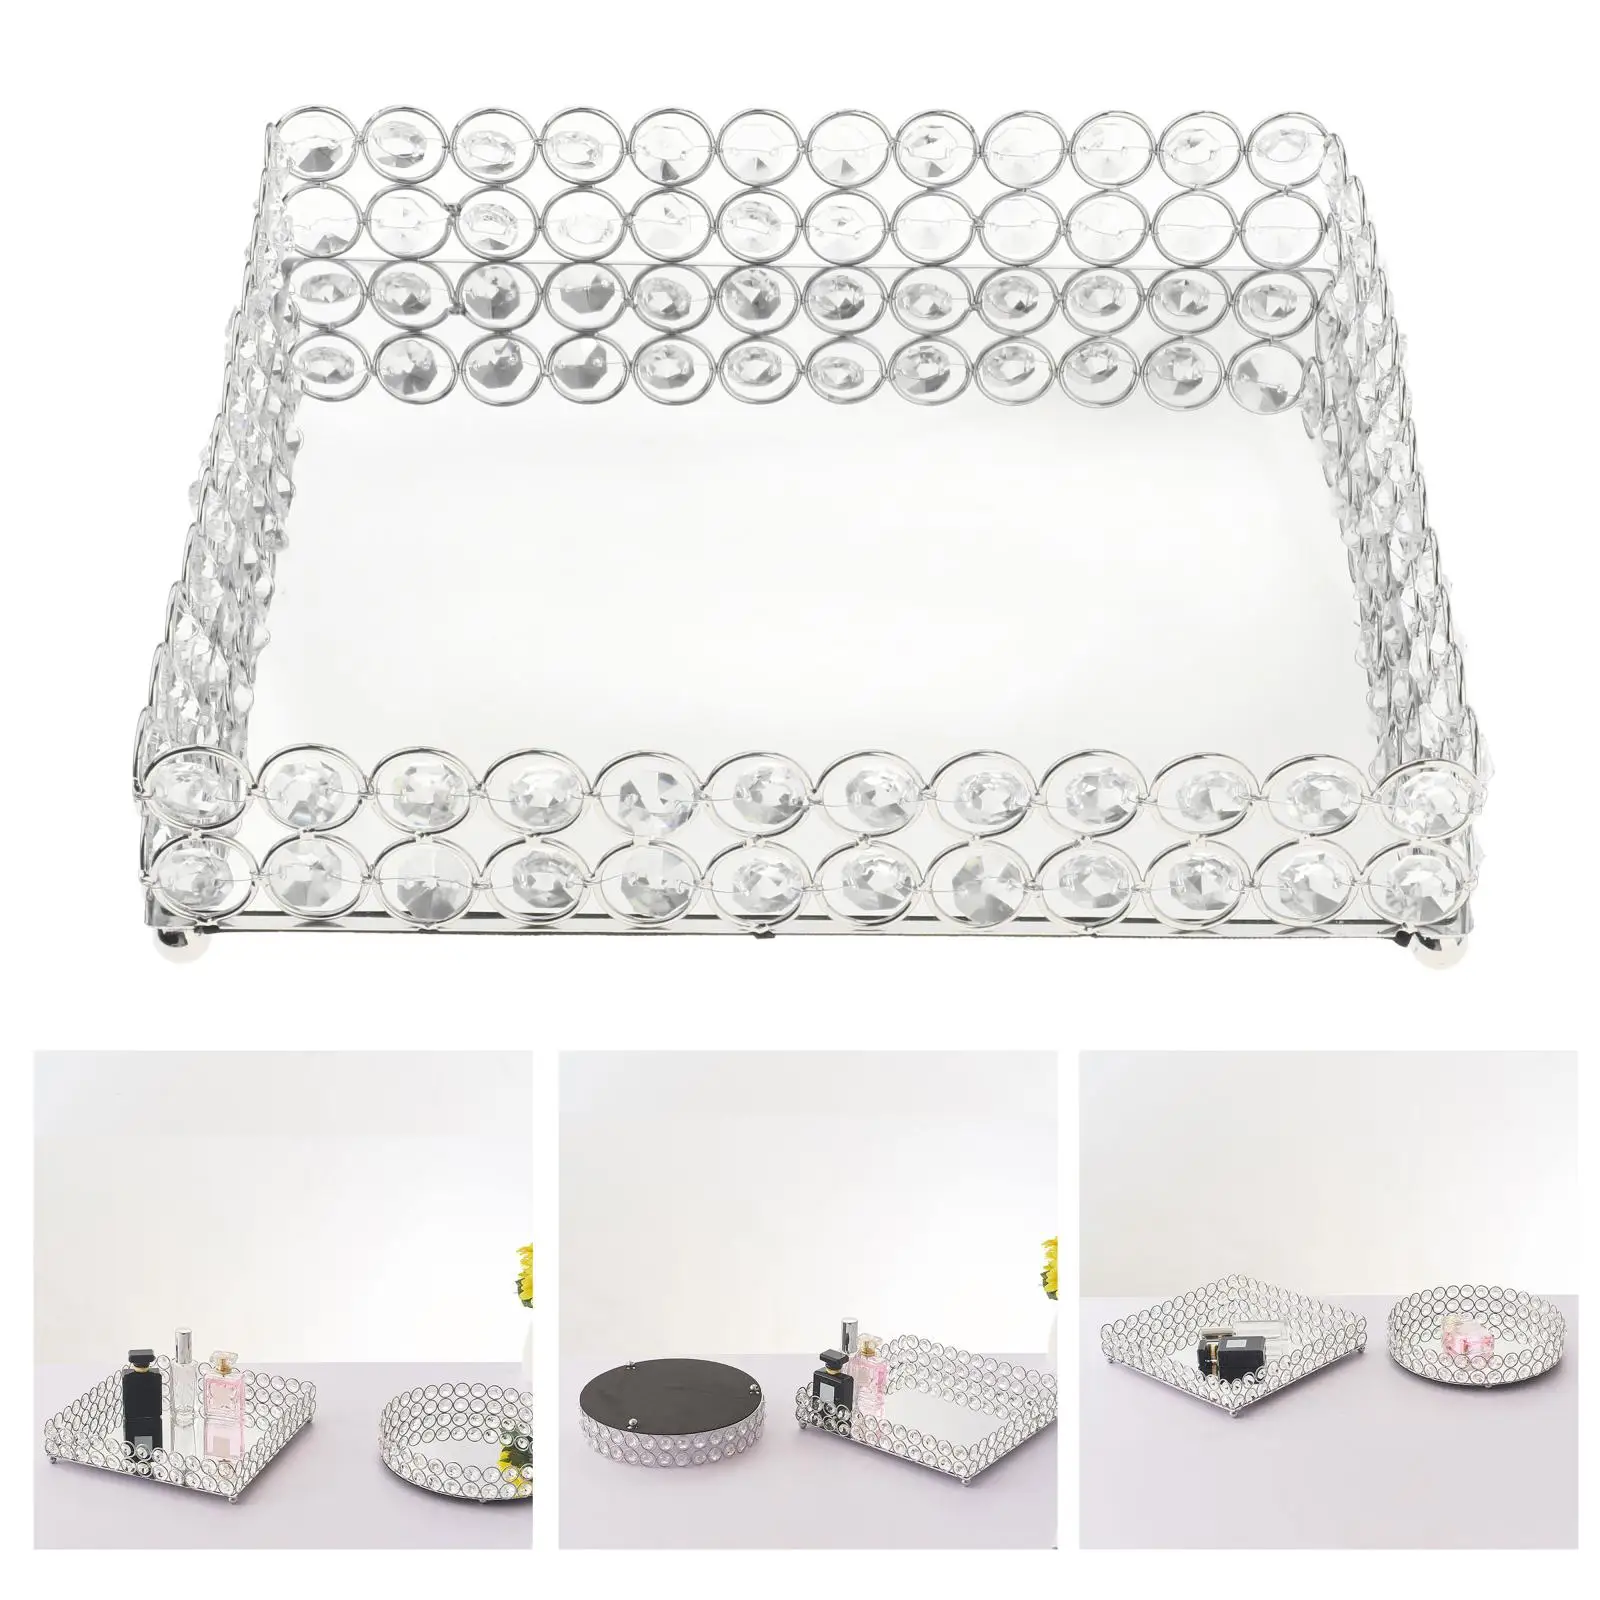 Crystal Cosmetic Makeup Tray 10.6 inches Large Square Vanity Tray Jewelry Trinket Organizer Tray Mirrored Decorative Trays